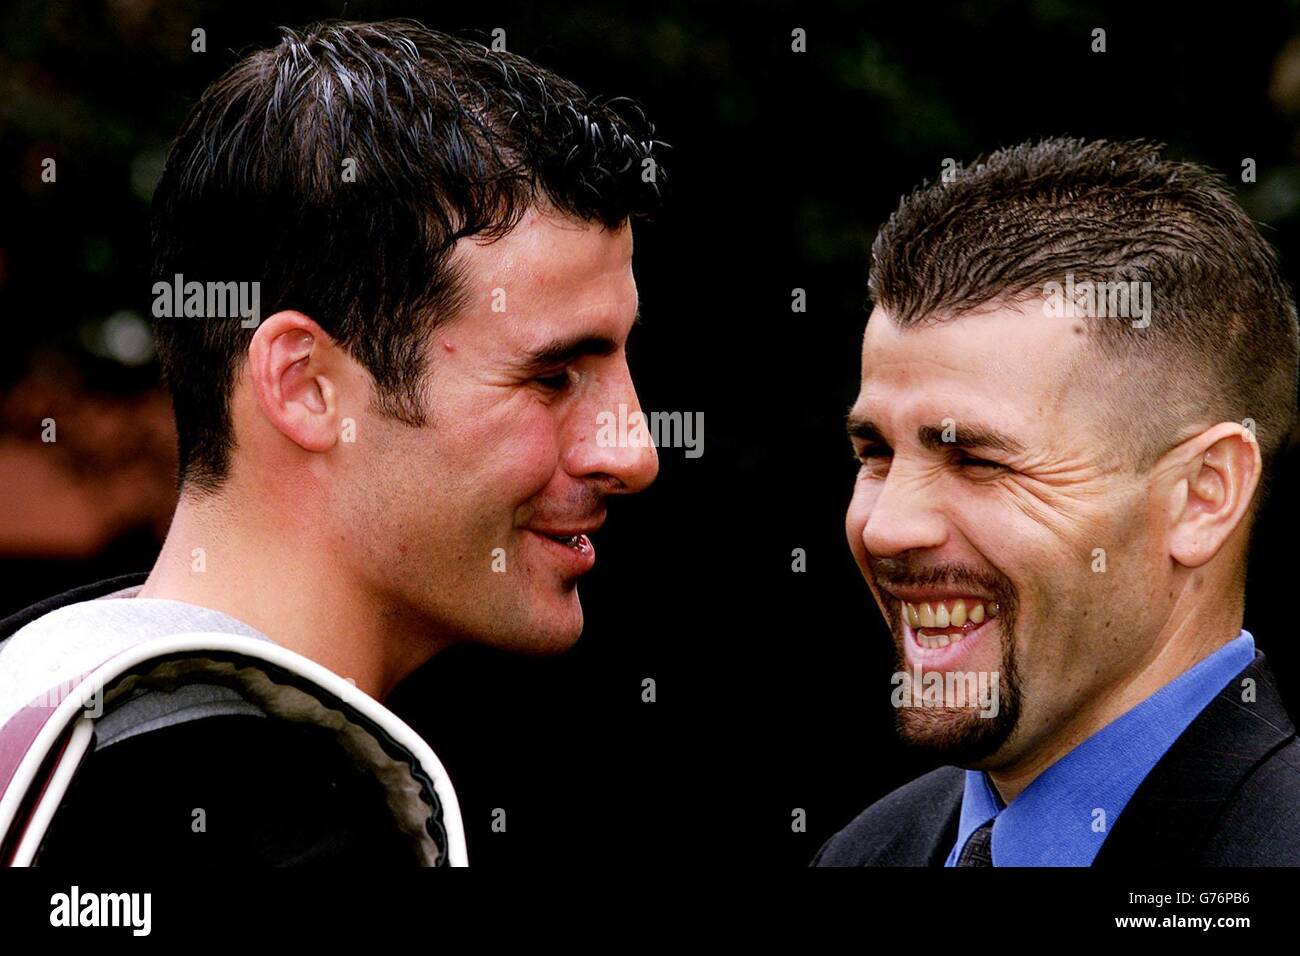 WBO Super-Middleweight Boxing Champion Joe Calzaghe (left) from Wales stands with his next challenger Miguel Jimenez from Puerto Rico, at a head to head press confrence at The Marriott Hotel in Cardiff, south Wales, prior to Saturday's bout at Cardiff Castle. Stock Photo